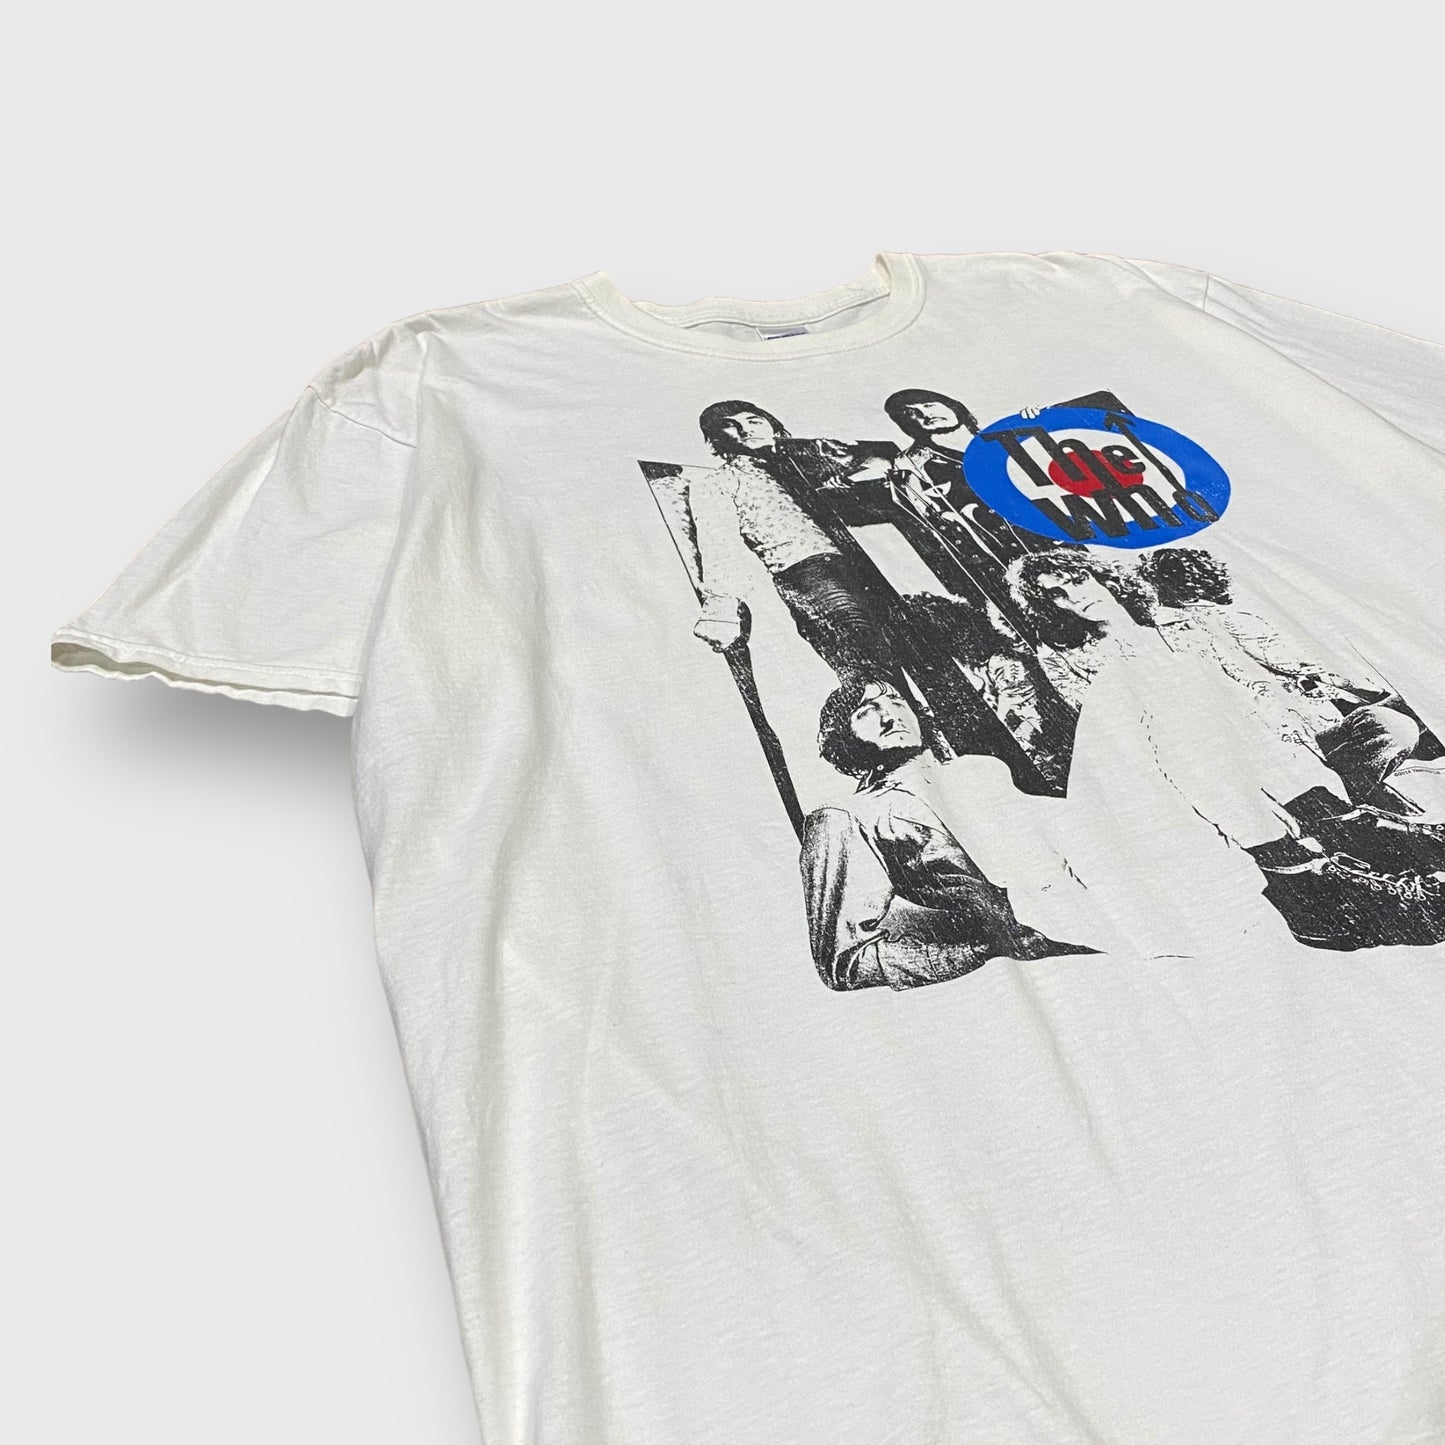 "The who" band t-shirt